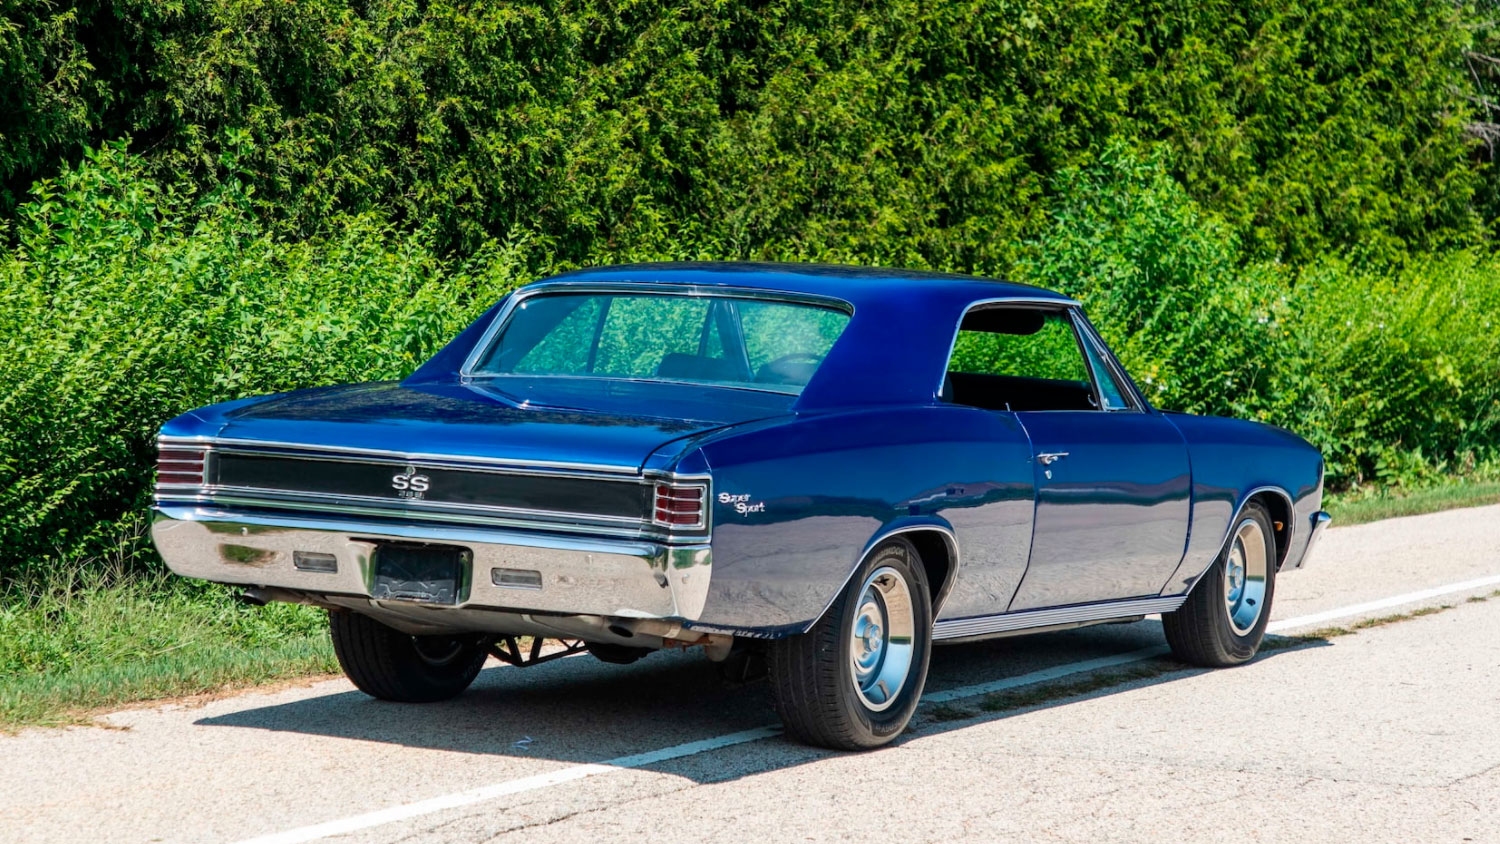 1967 Chevy Chevelle SS Hot Rod Heading To Auction